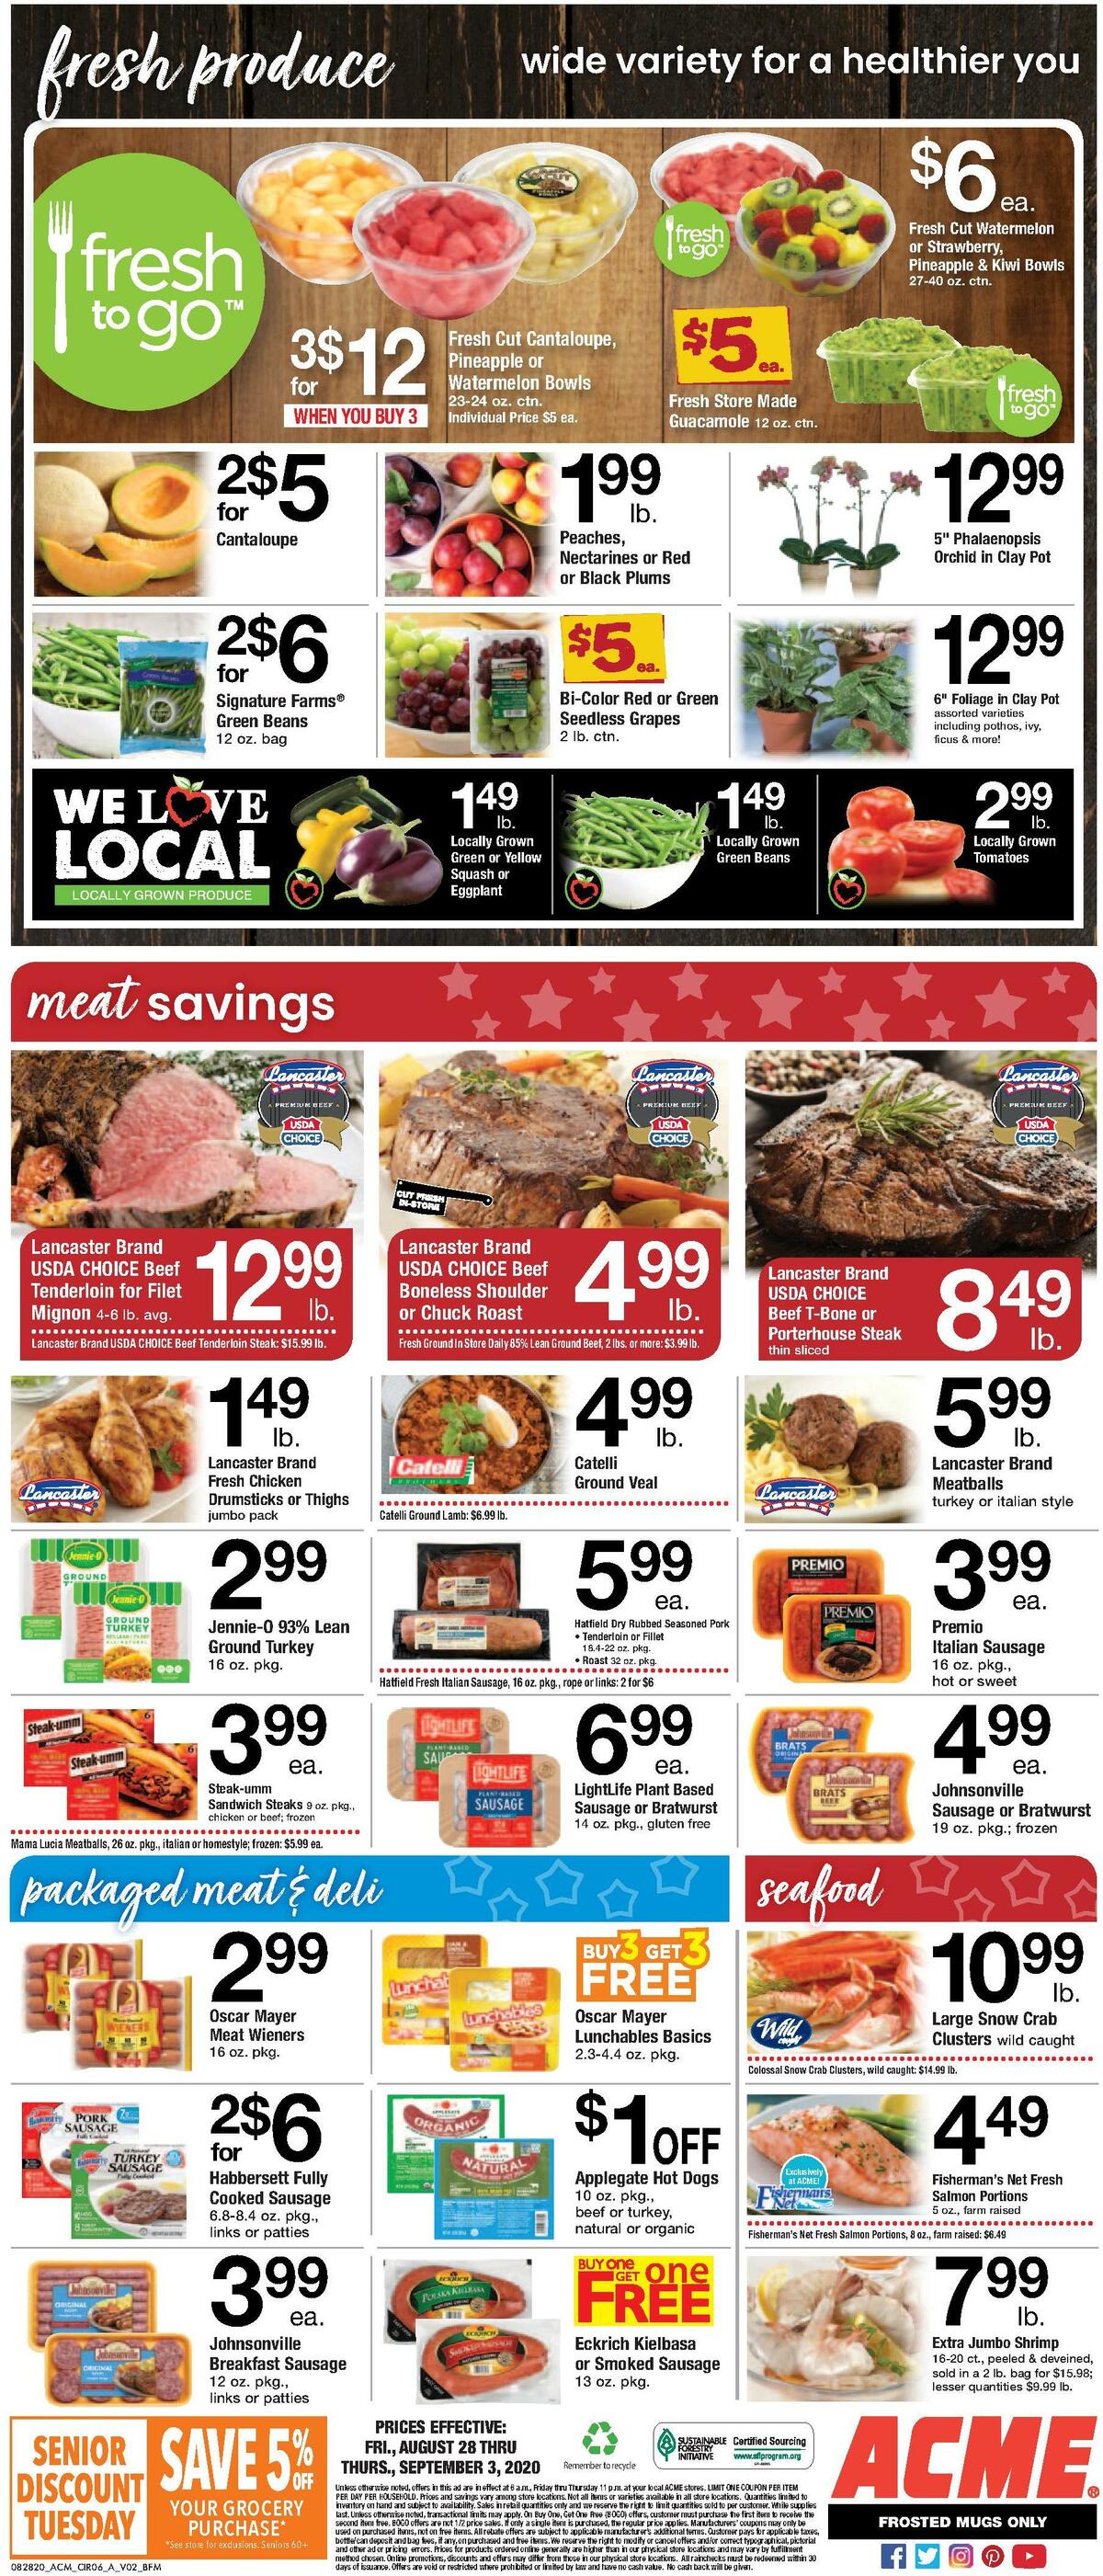 ACME Markets Weekly Ad from August 28